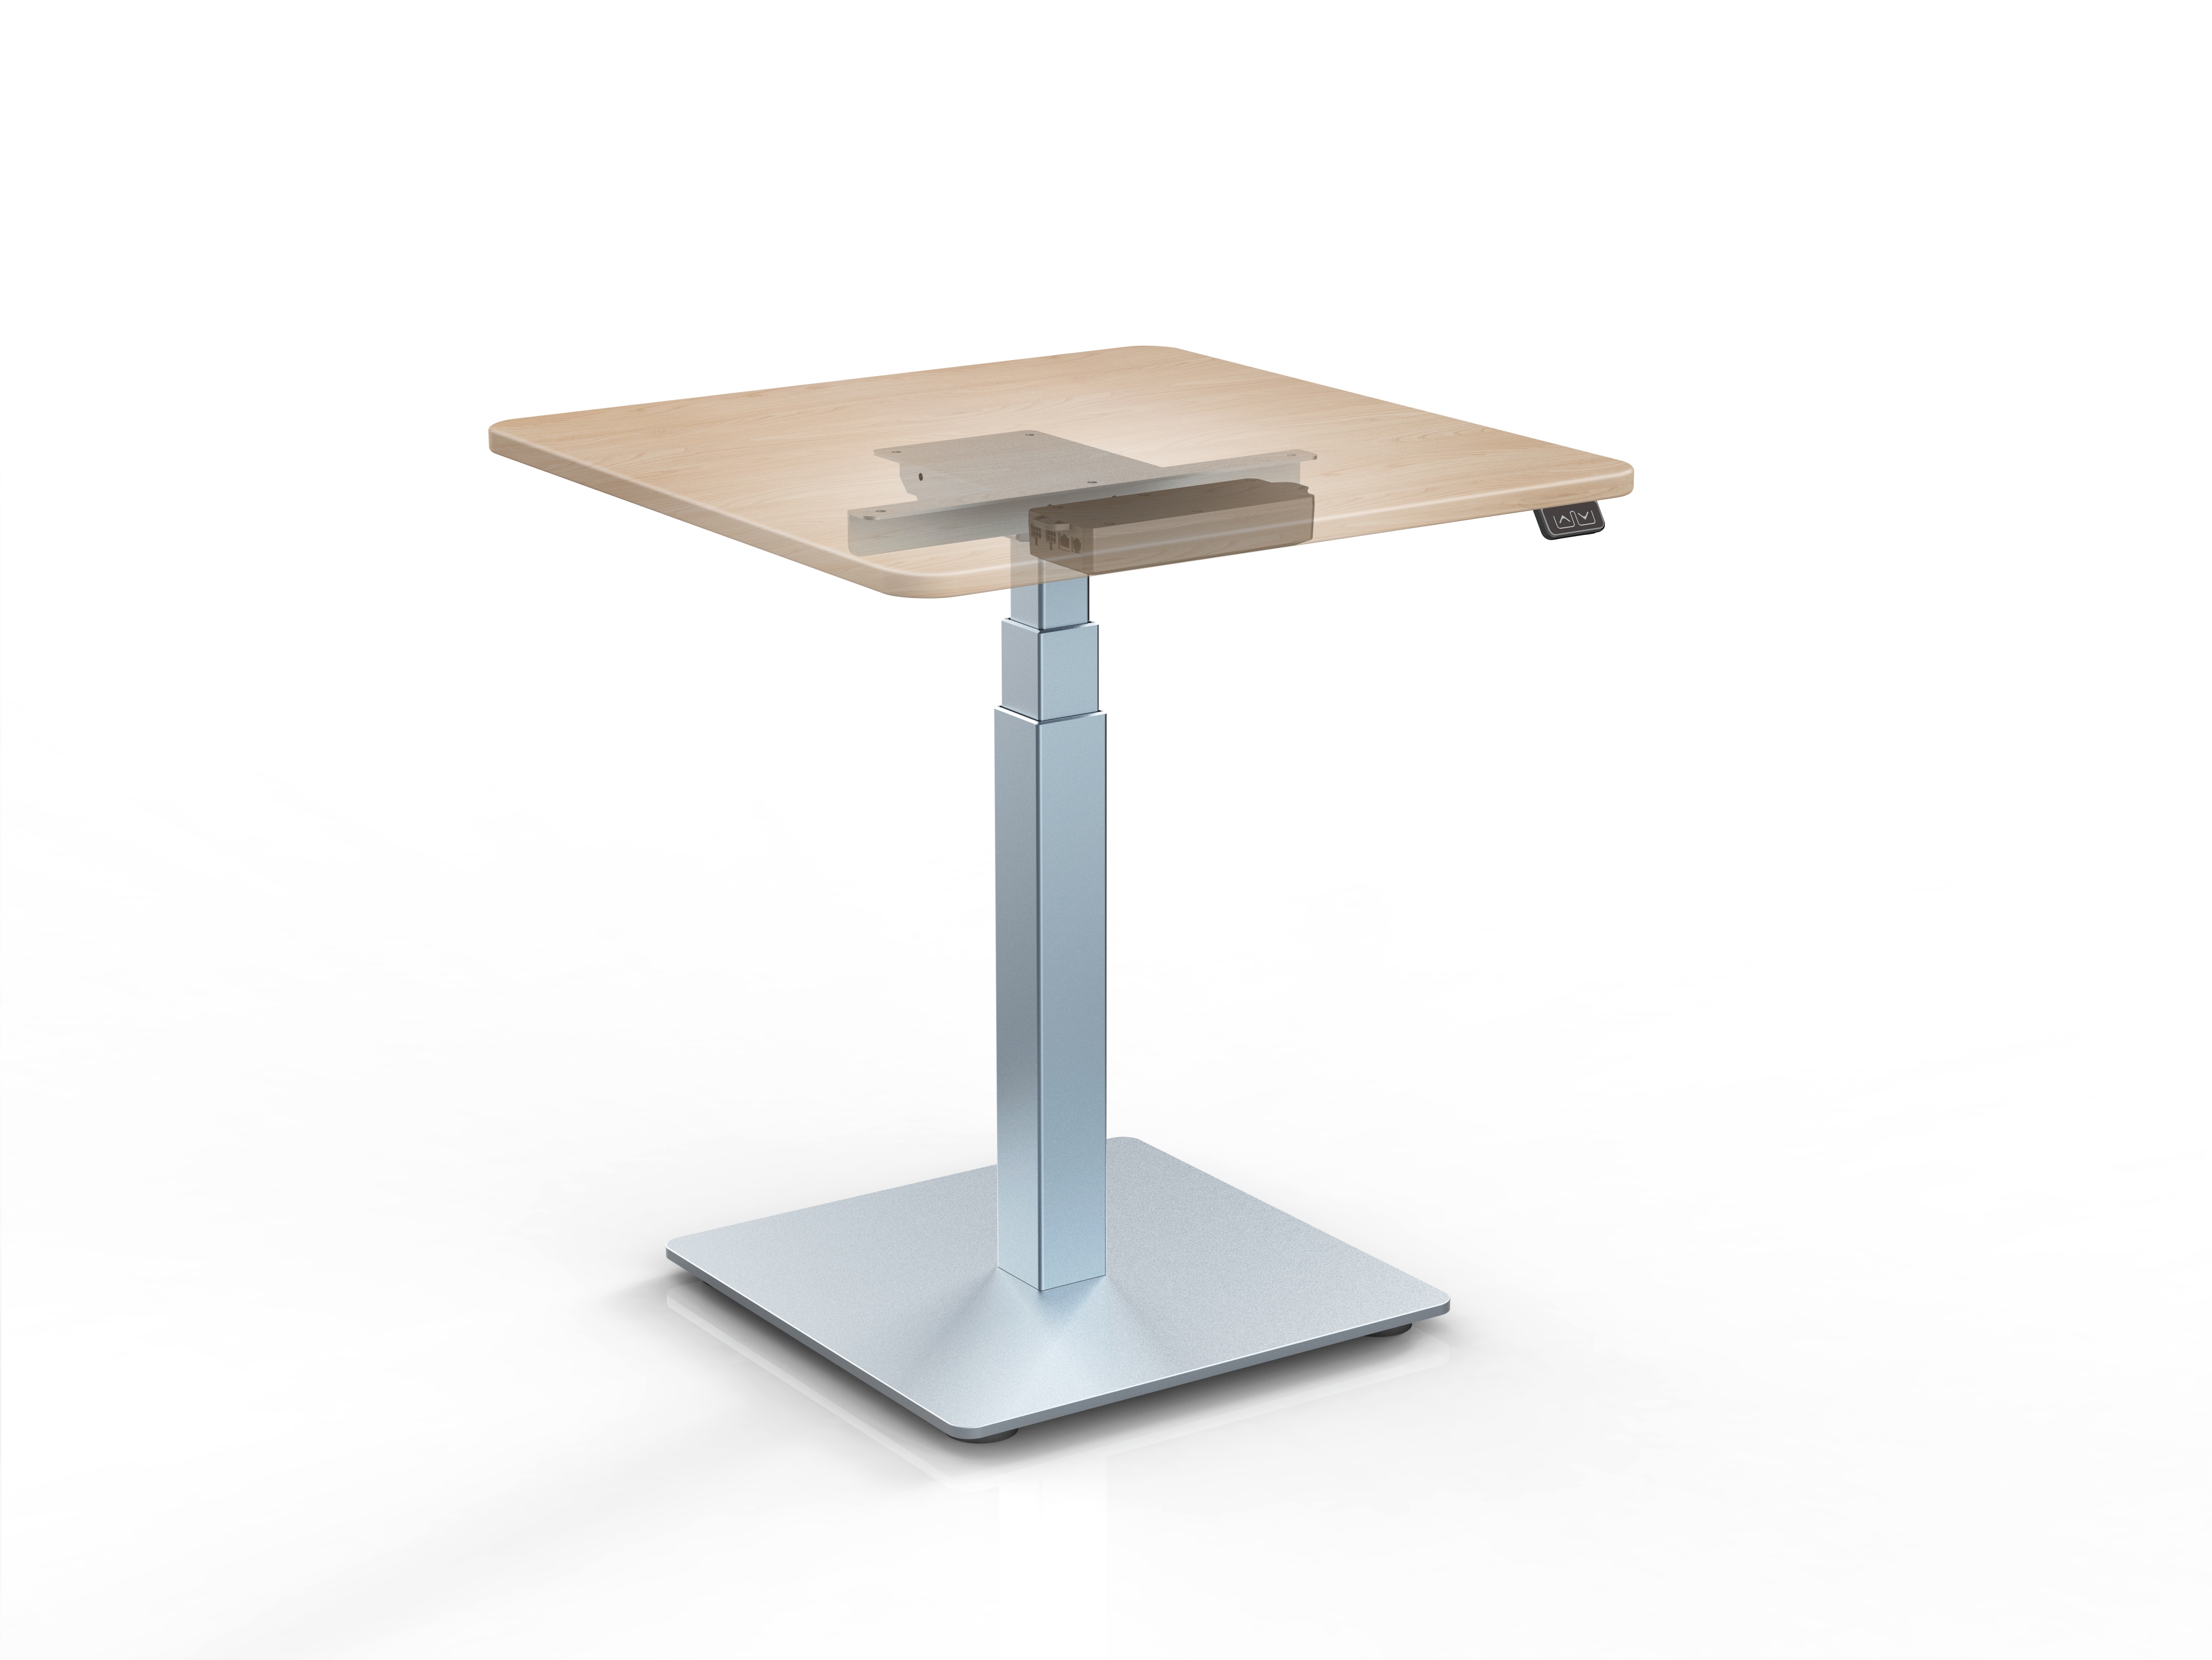 Hafele Launches Ergonomic Height Adjustable Tables - Say Goodbye to Sedentary Lifestyle